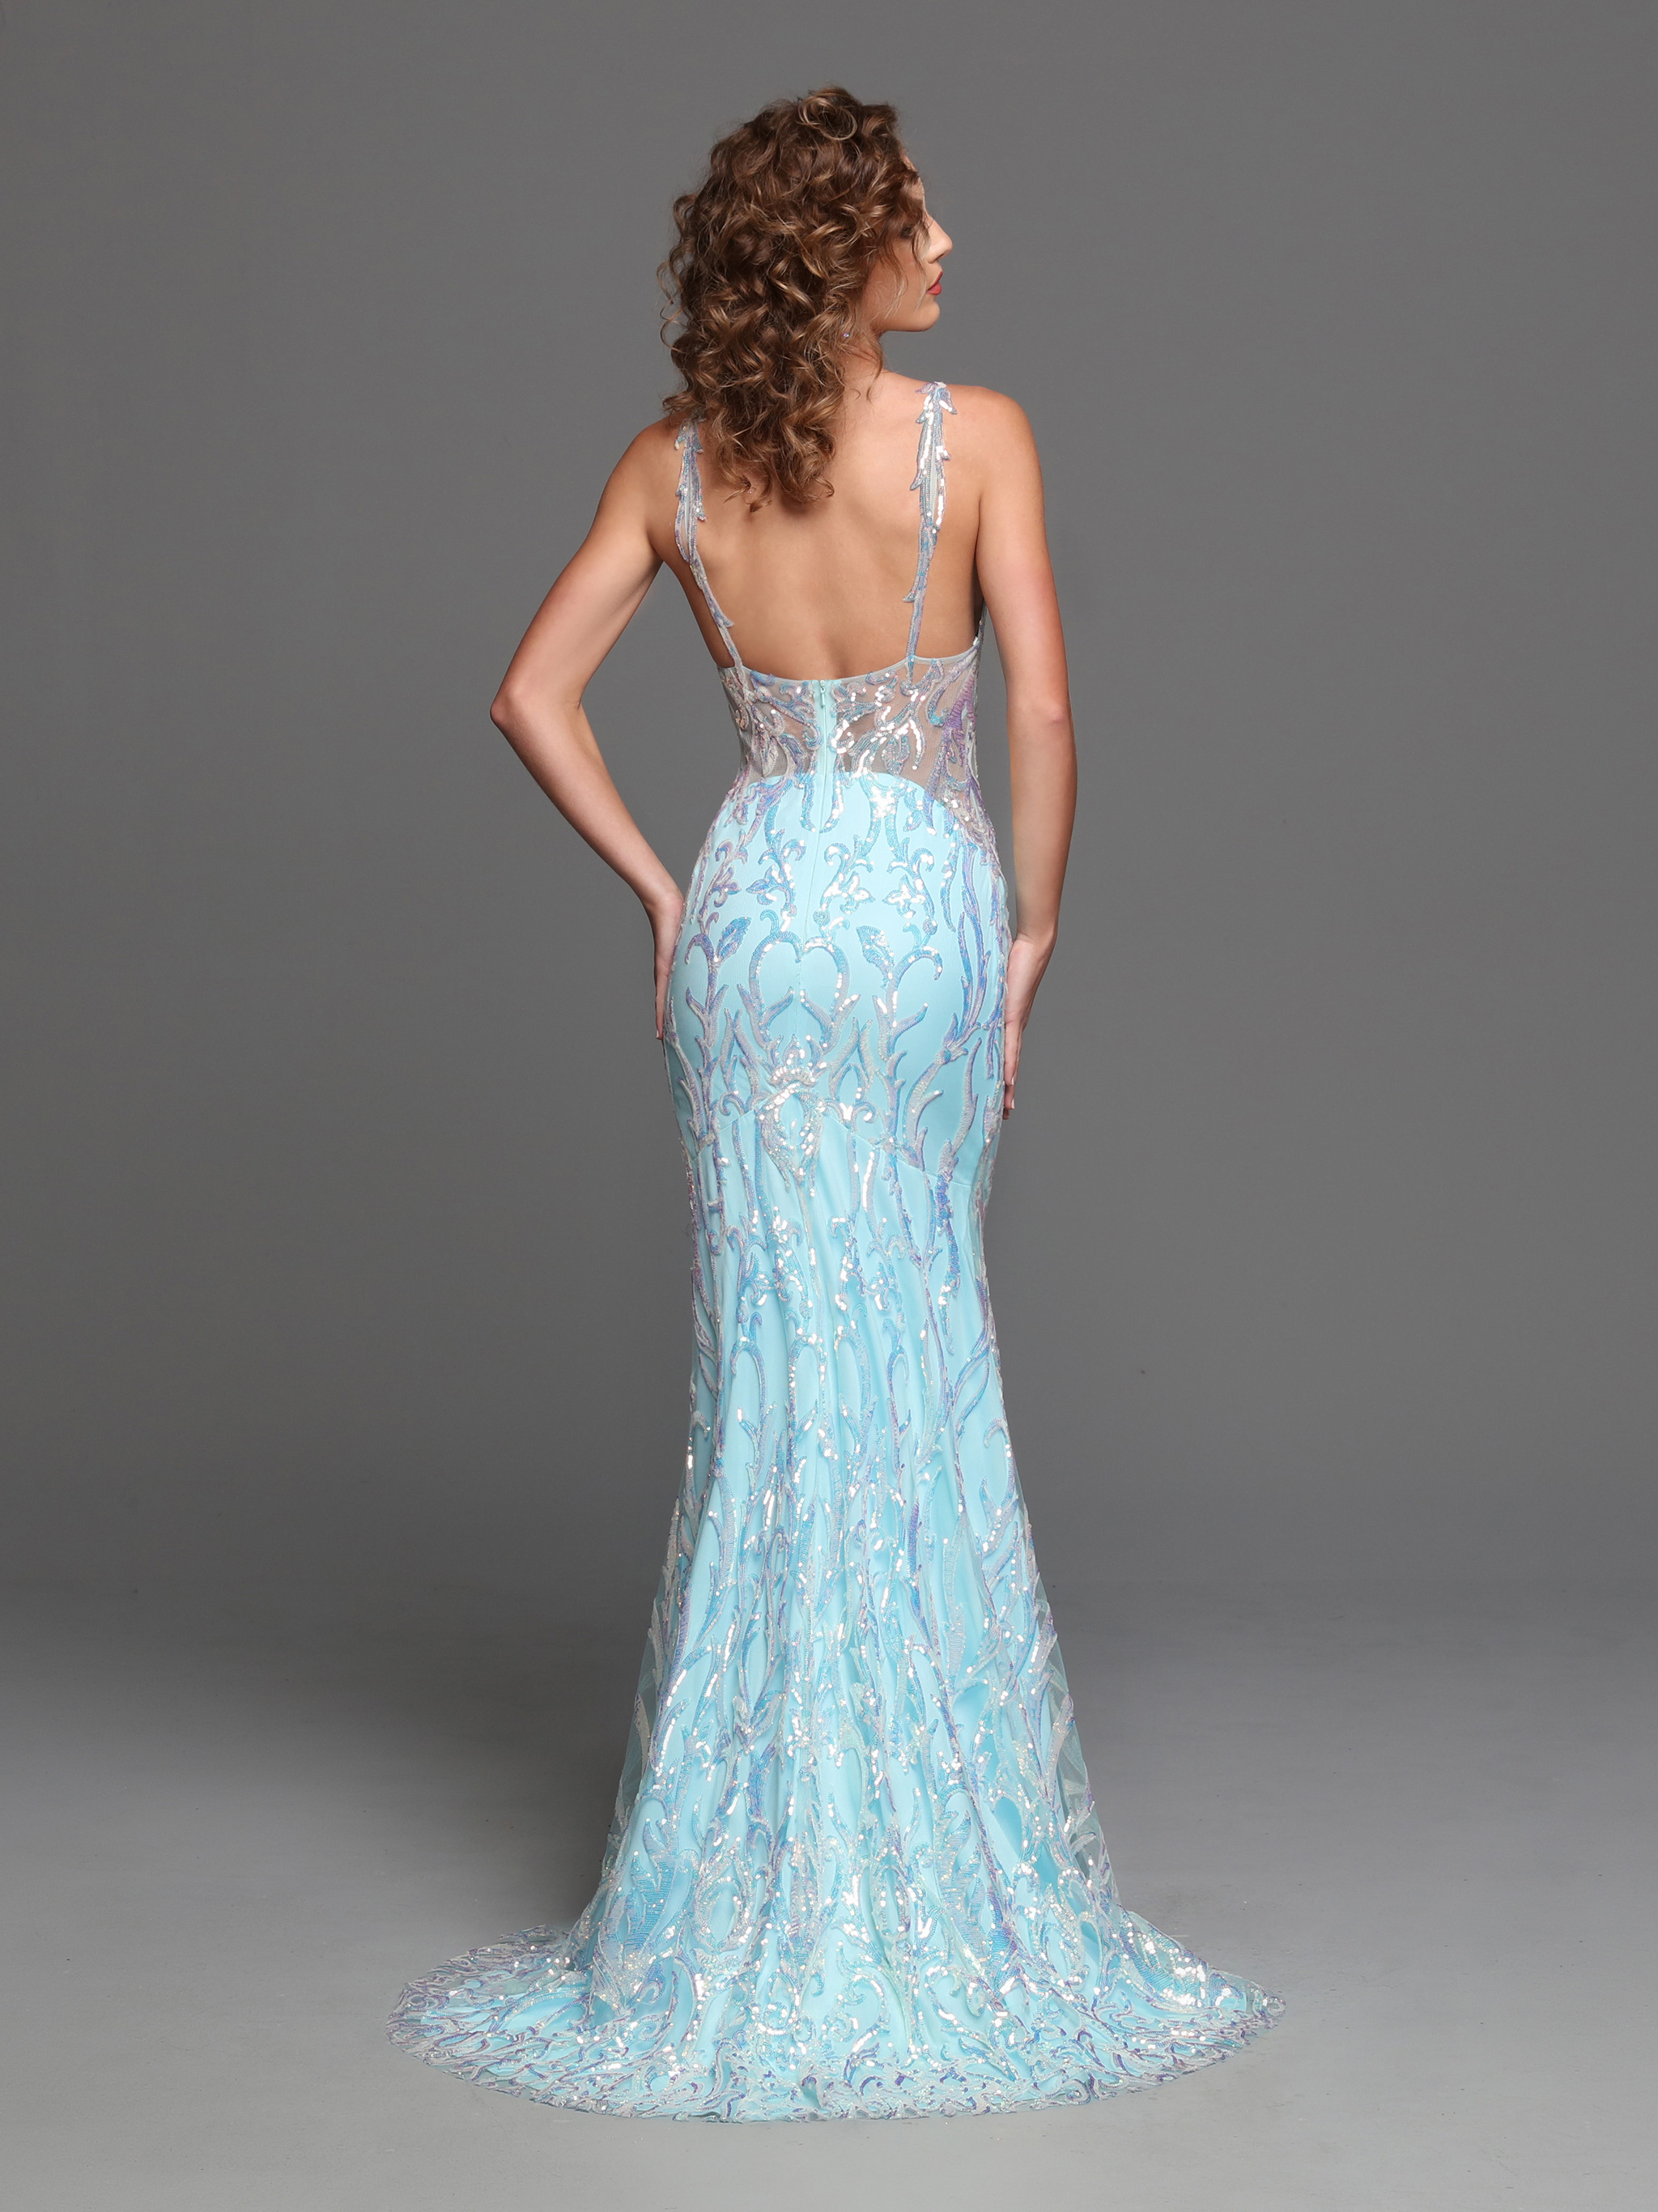 Image showing back view of style #72299